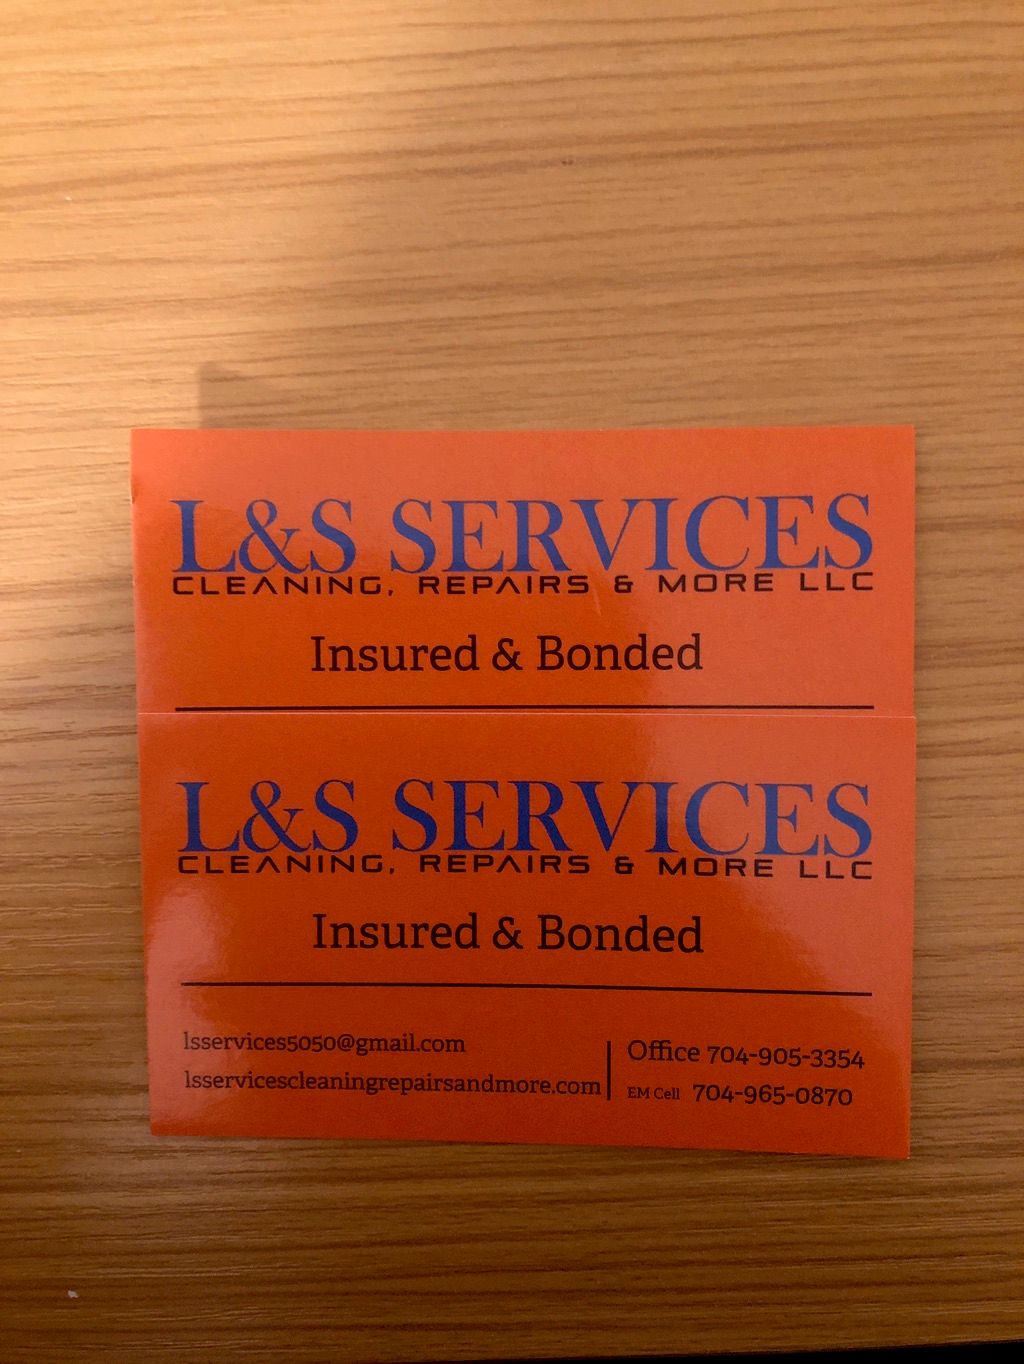 L&S Services Cleaning Repairs & More LLC